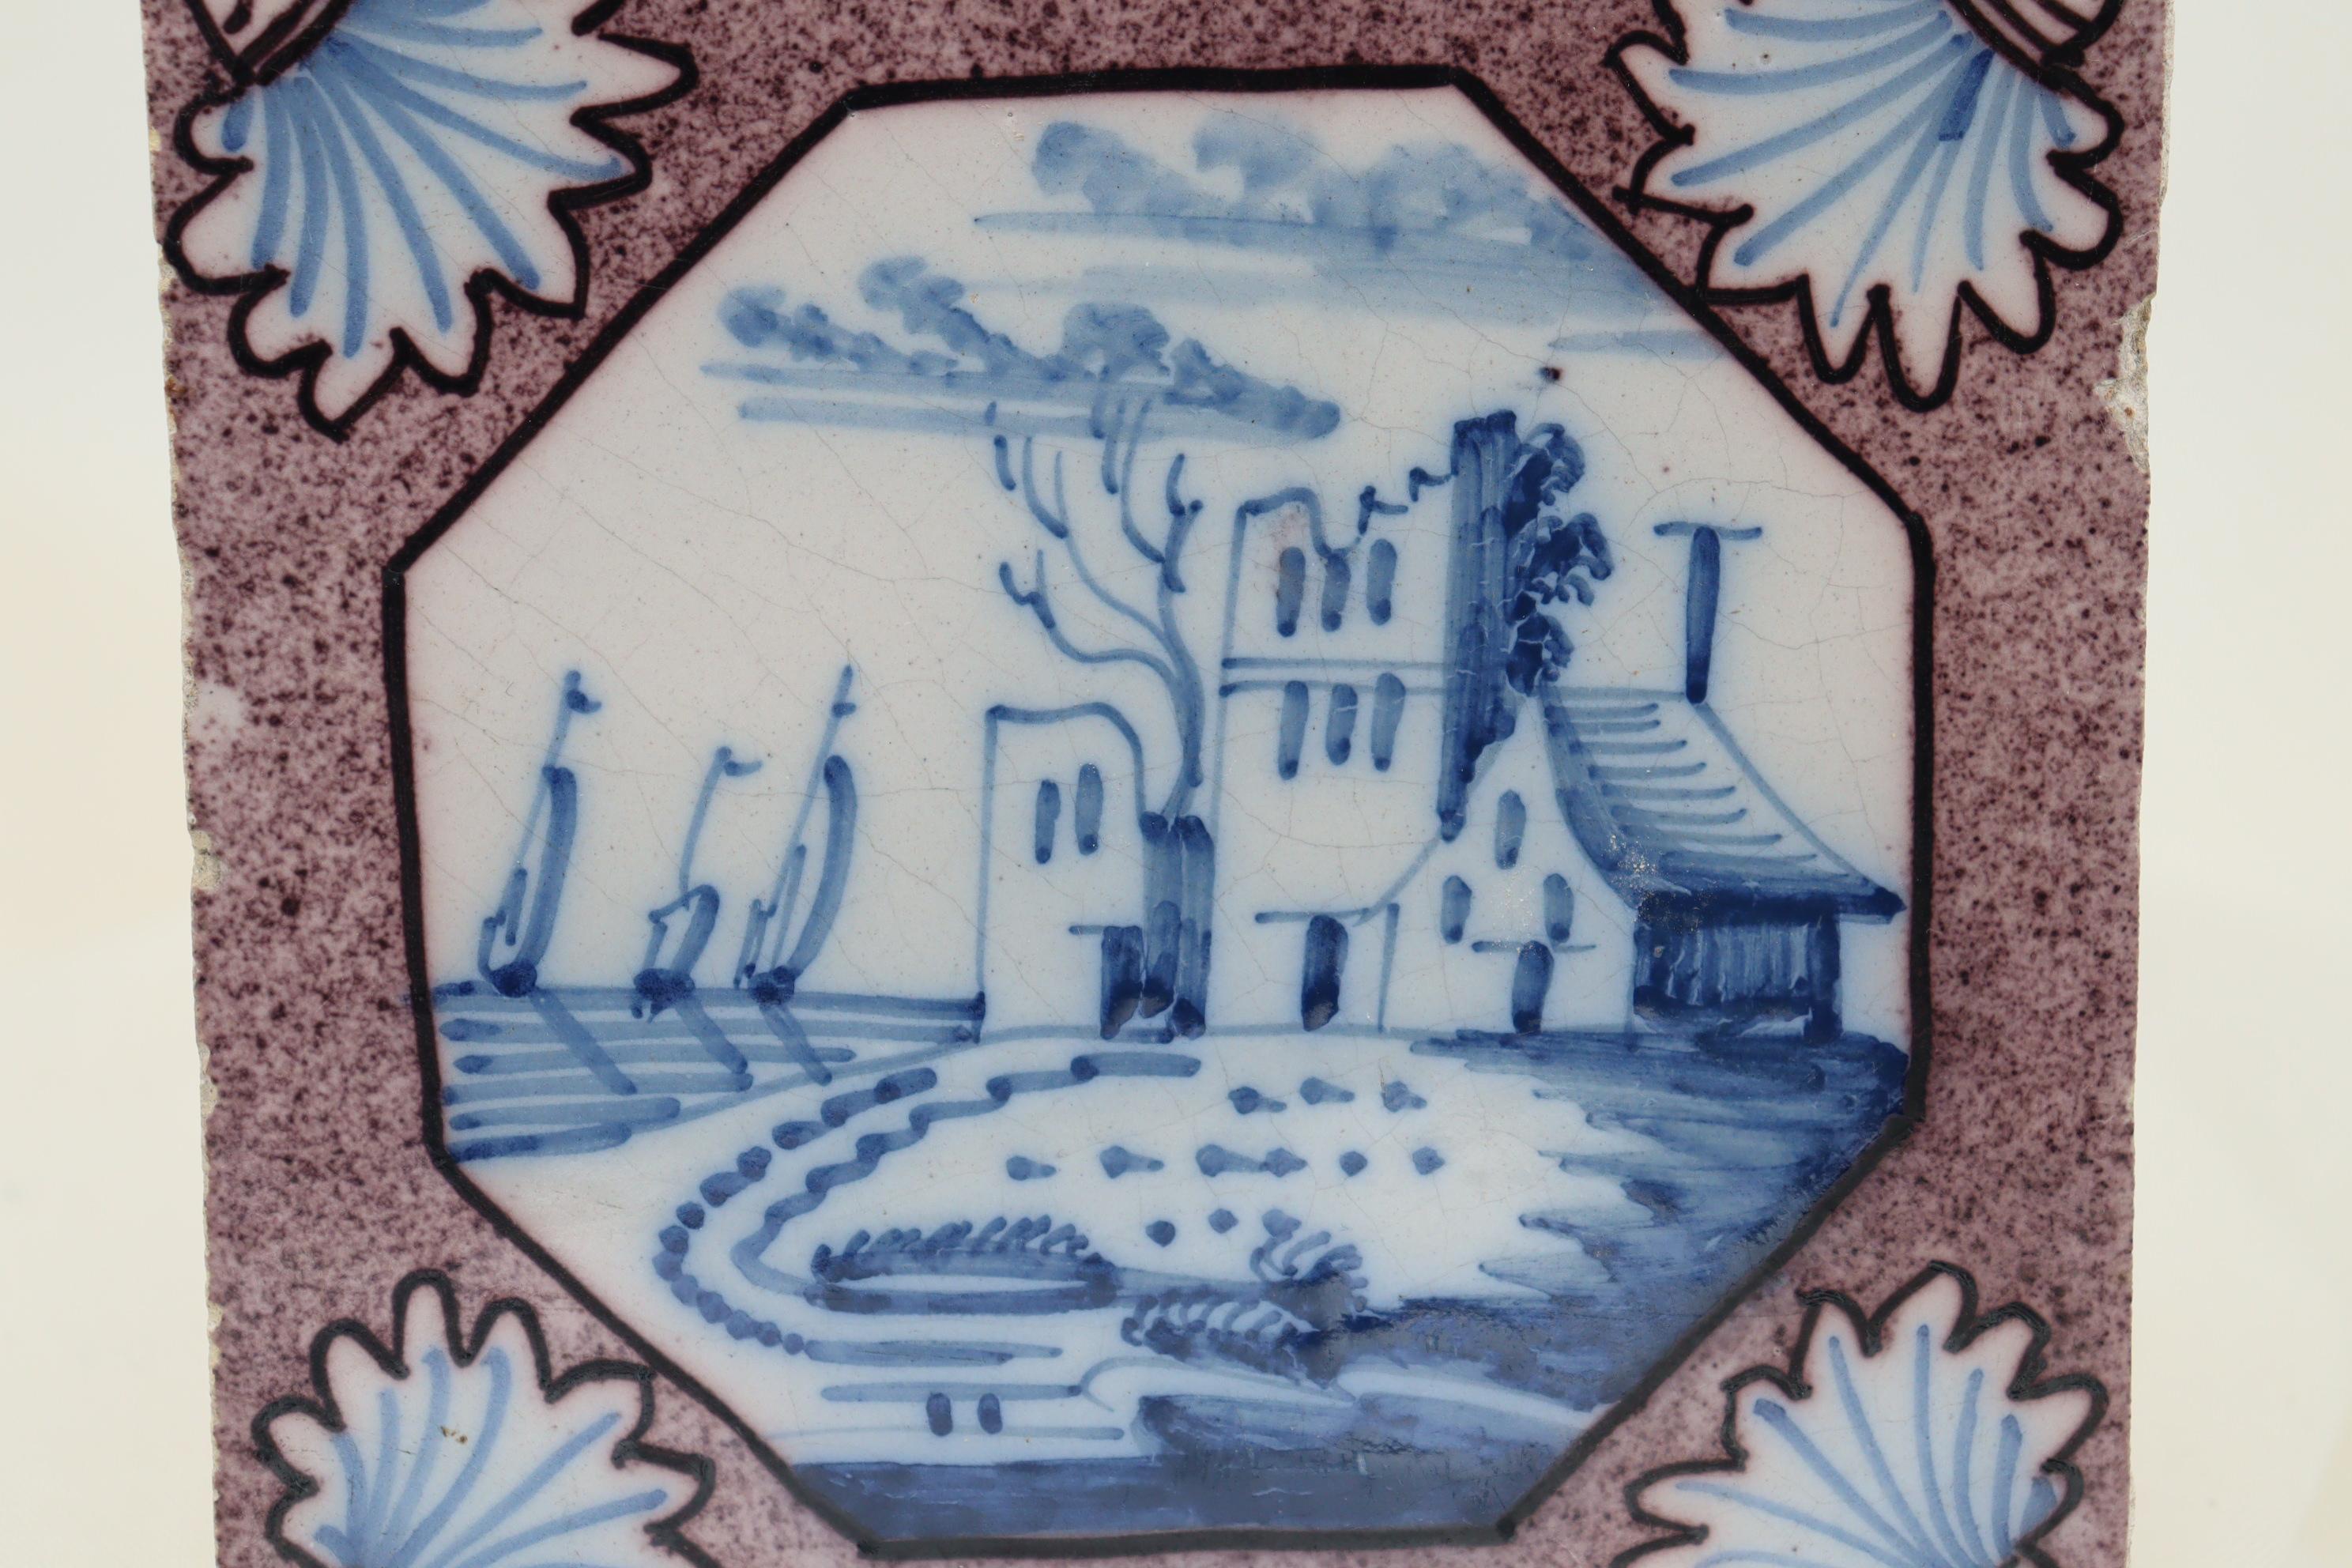 The central decoration on this Dutch tile is a hand painted scene of a large house with three ships in the background, all done in blue on the white tile. The octagonal cartouche is surrounded by a speckled purple ground with stylised carnations as